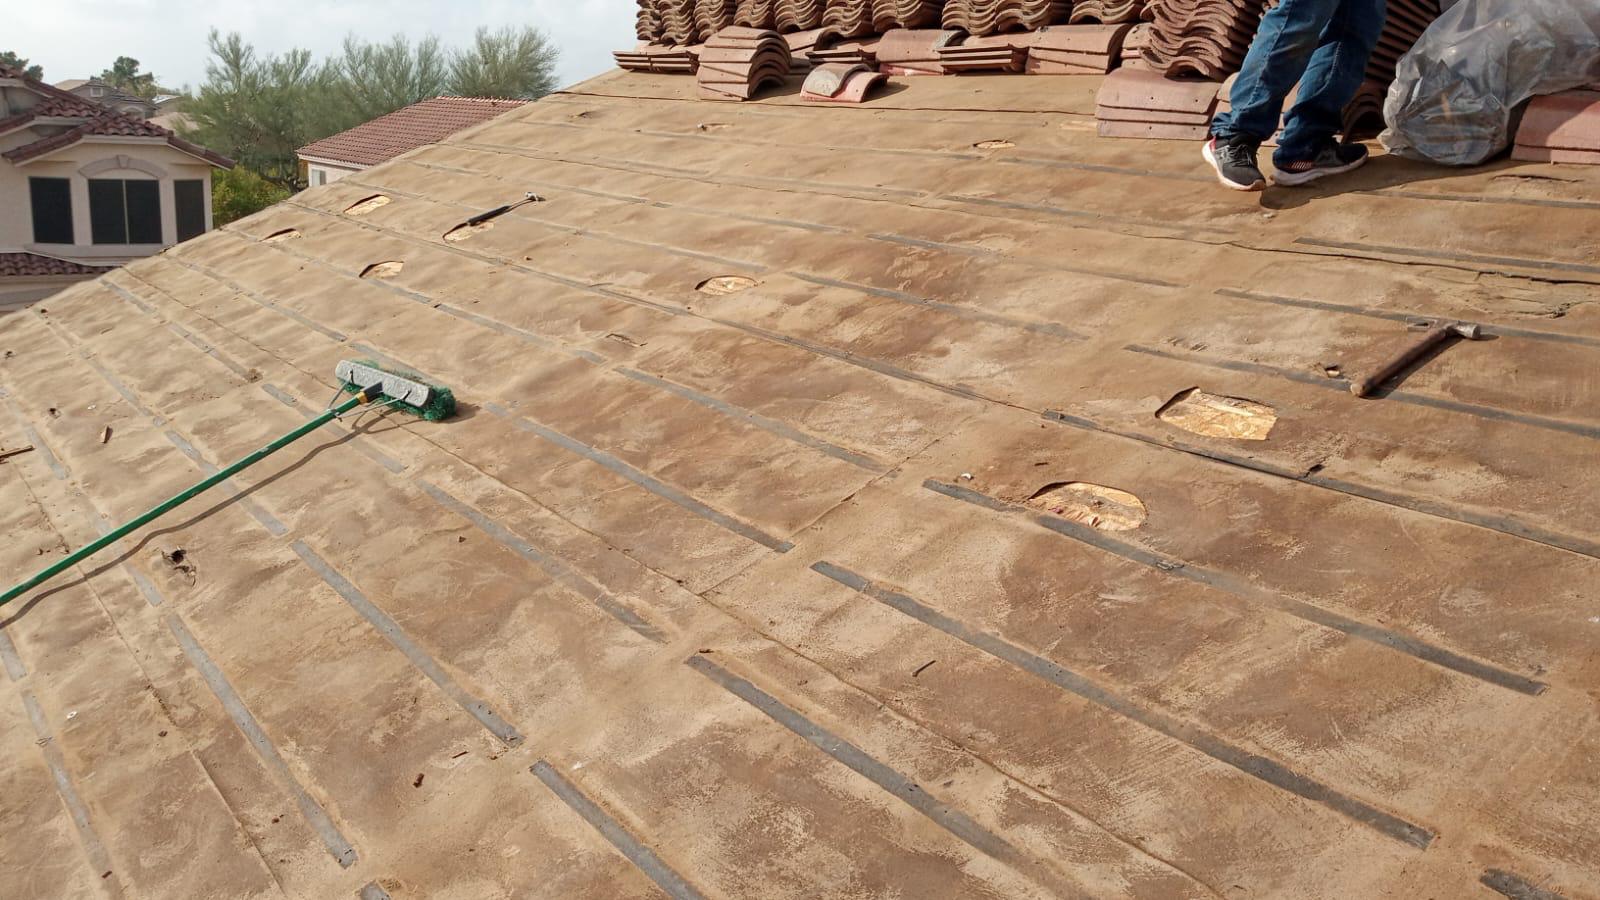 Underlayment process by Behmer, a key step in tile re-roofing in Estancia.